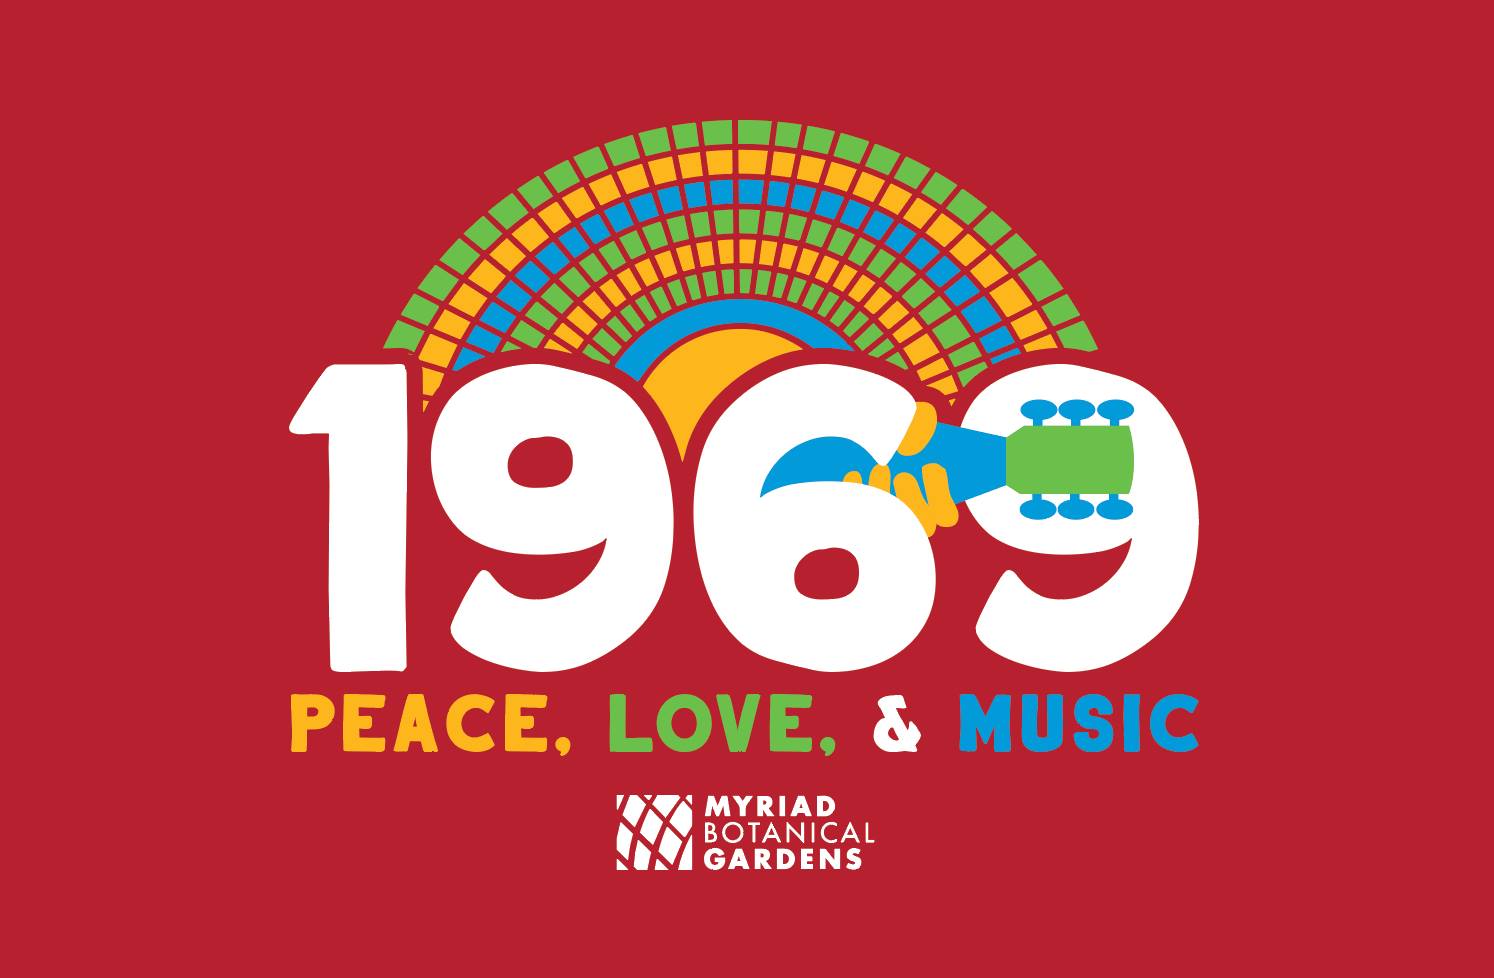 1969: Love, Peace, and Music - OkSessions